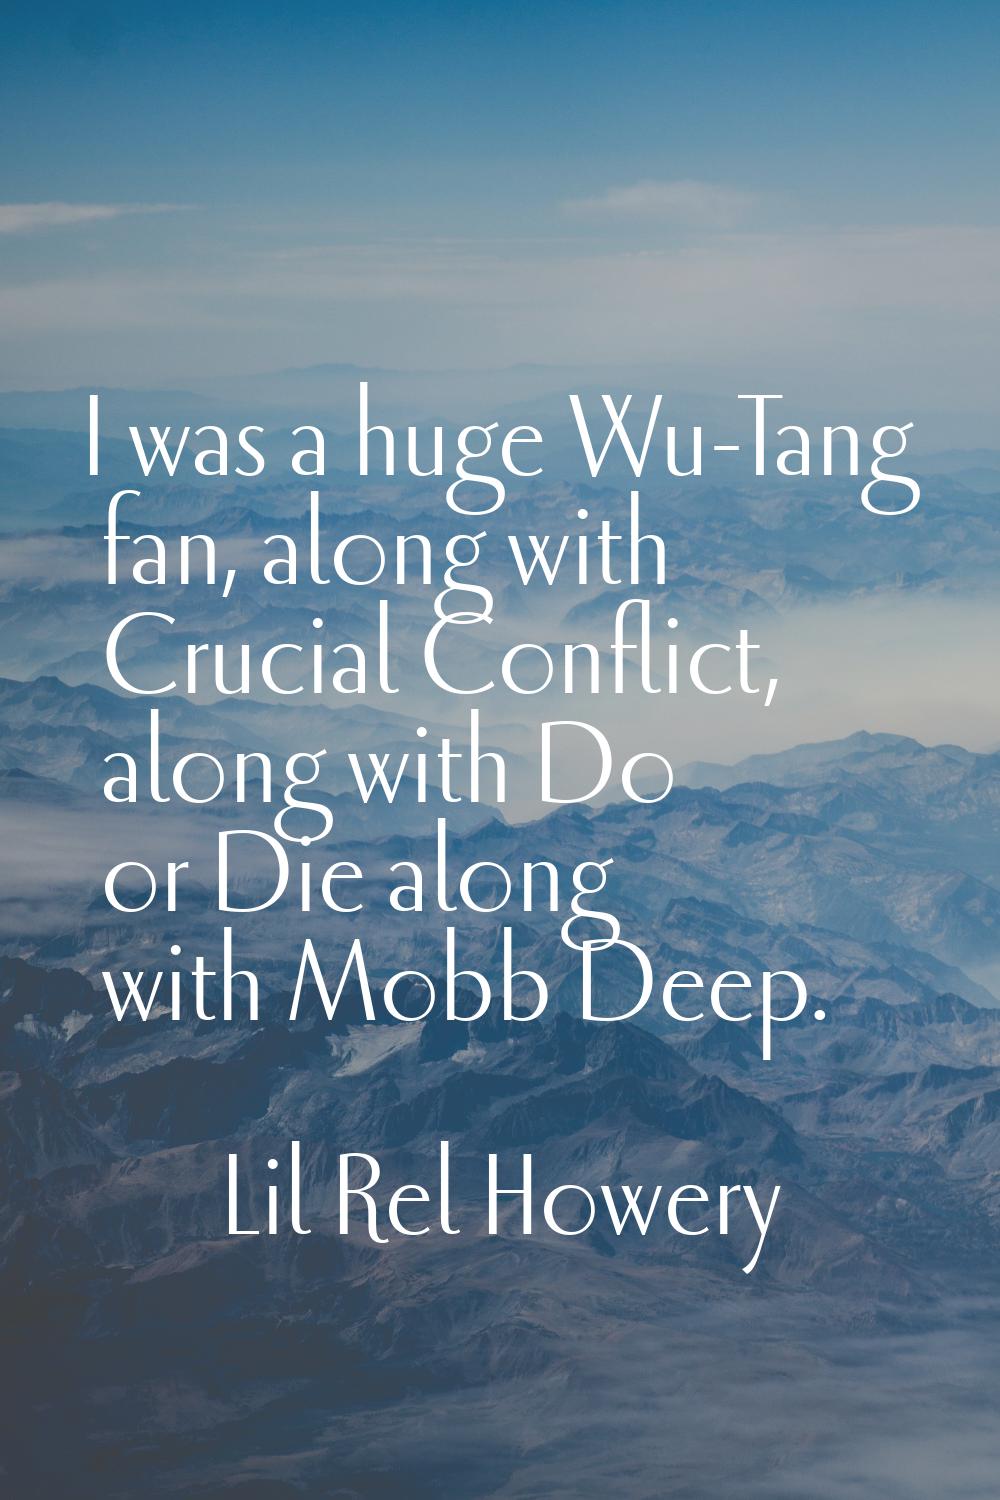 I was a huge Wu-Tang fan, along with Crucial Conflict, along with Do or Die along with Mobb Deep.